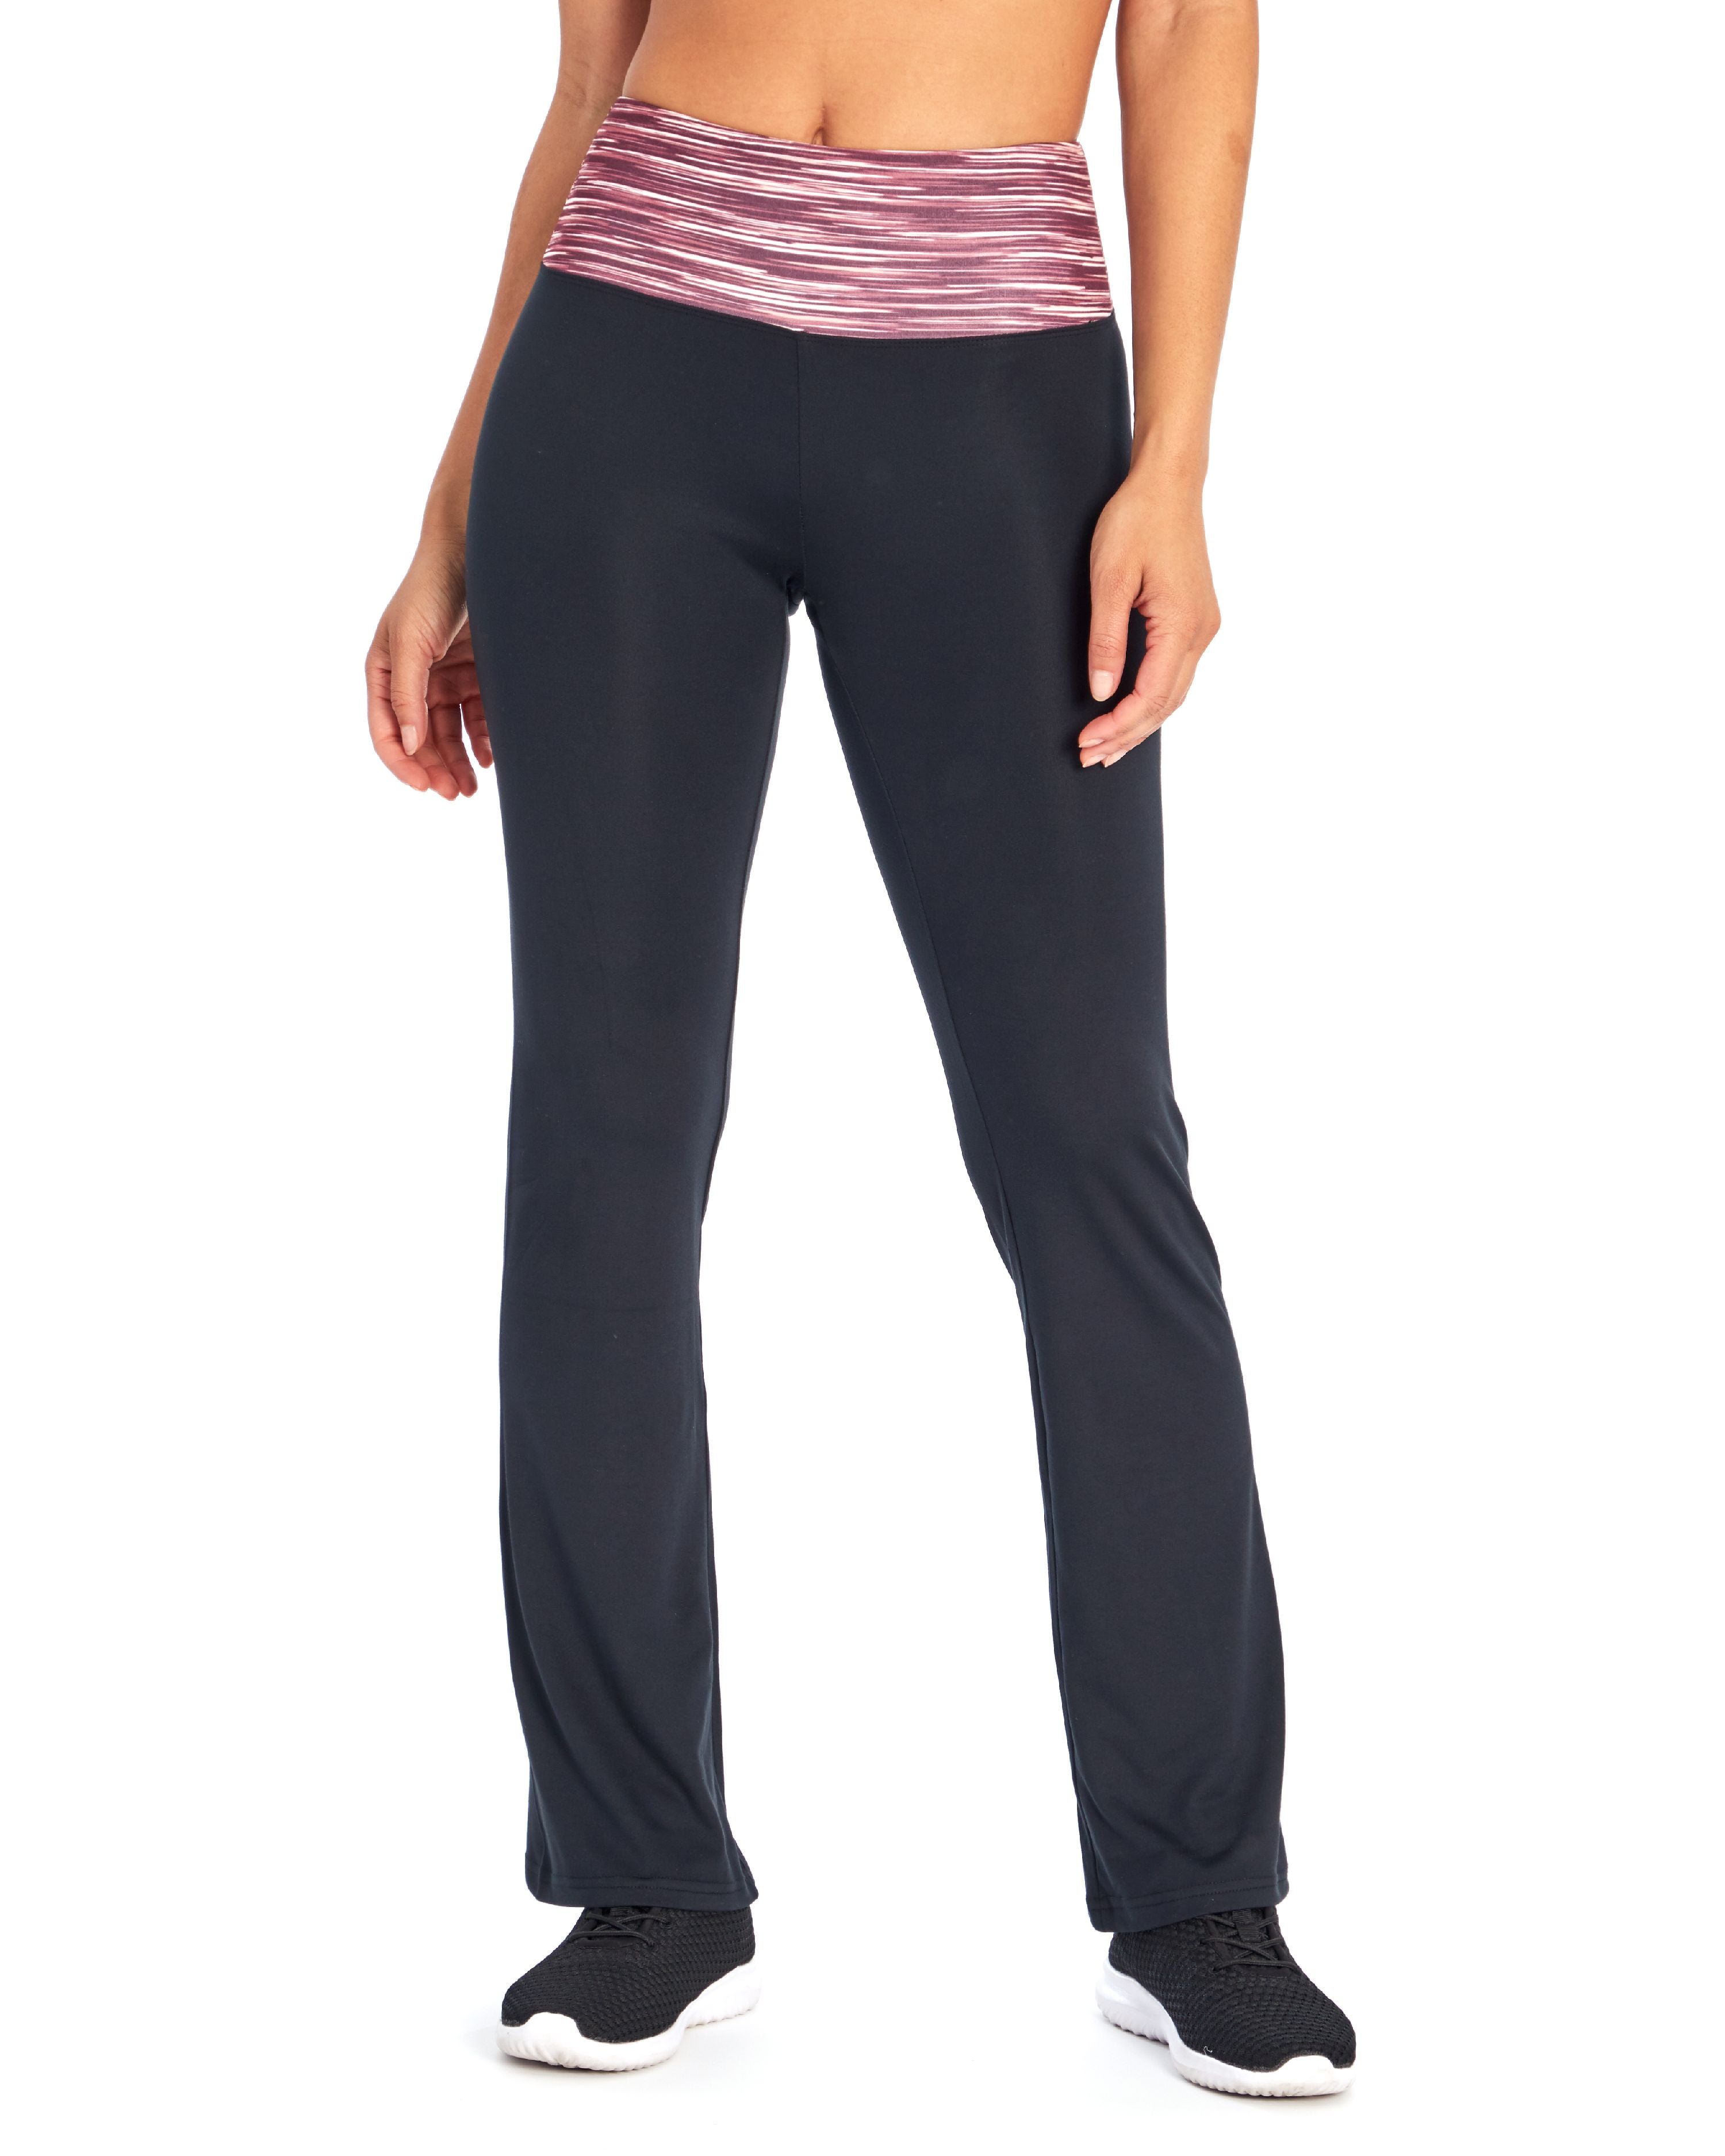 Bally Total Fitness - Bally Total Fitness Women's Active Barely Flare ...